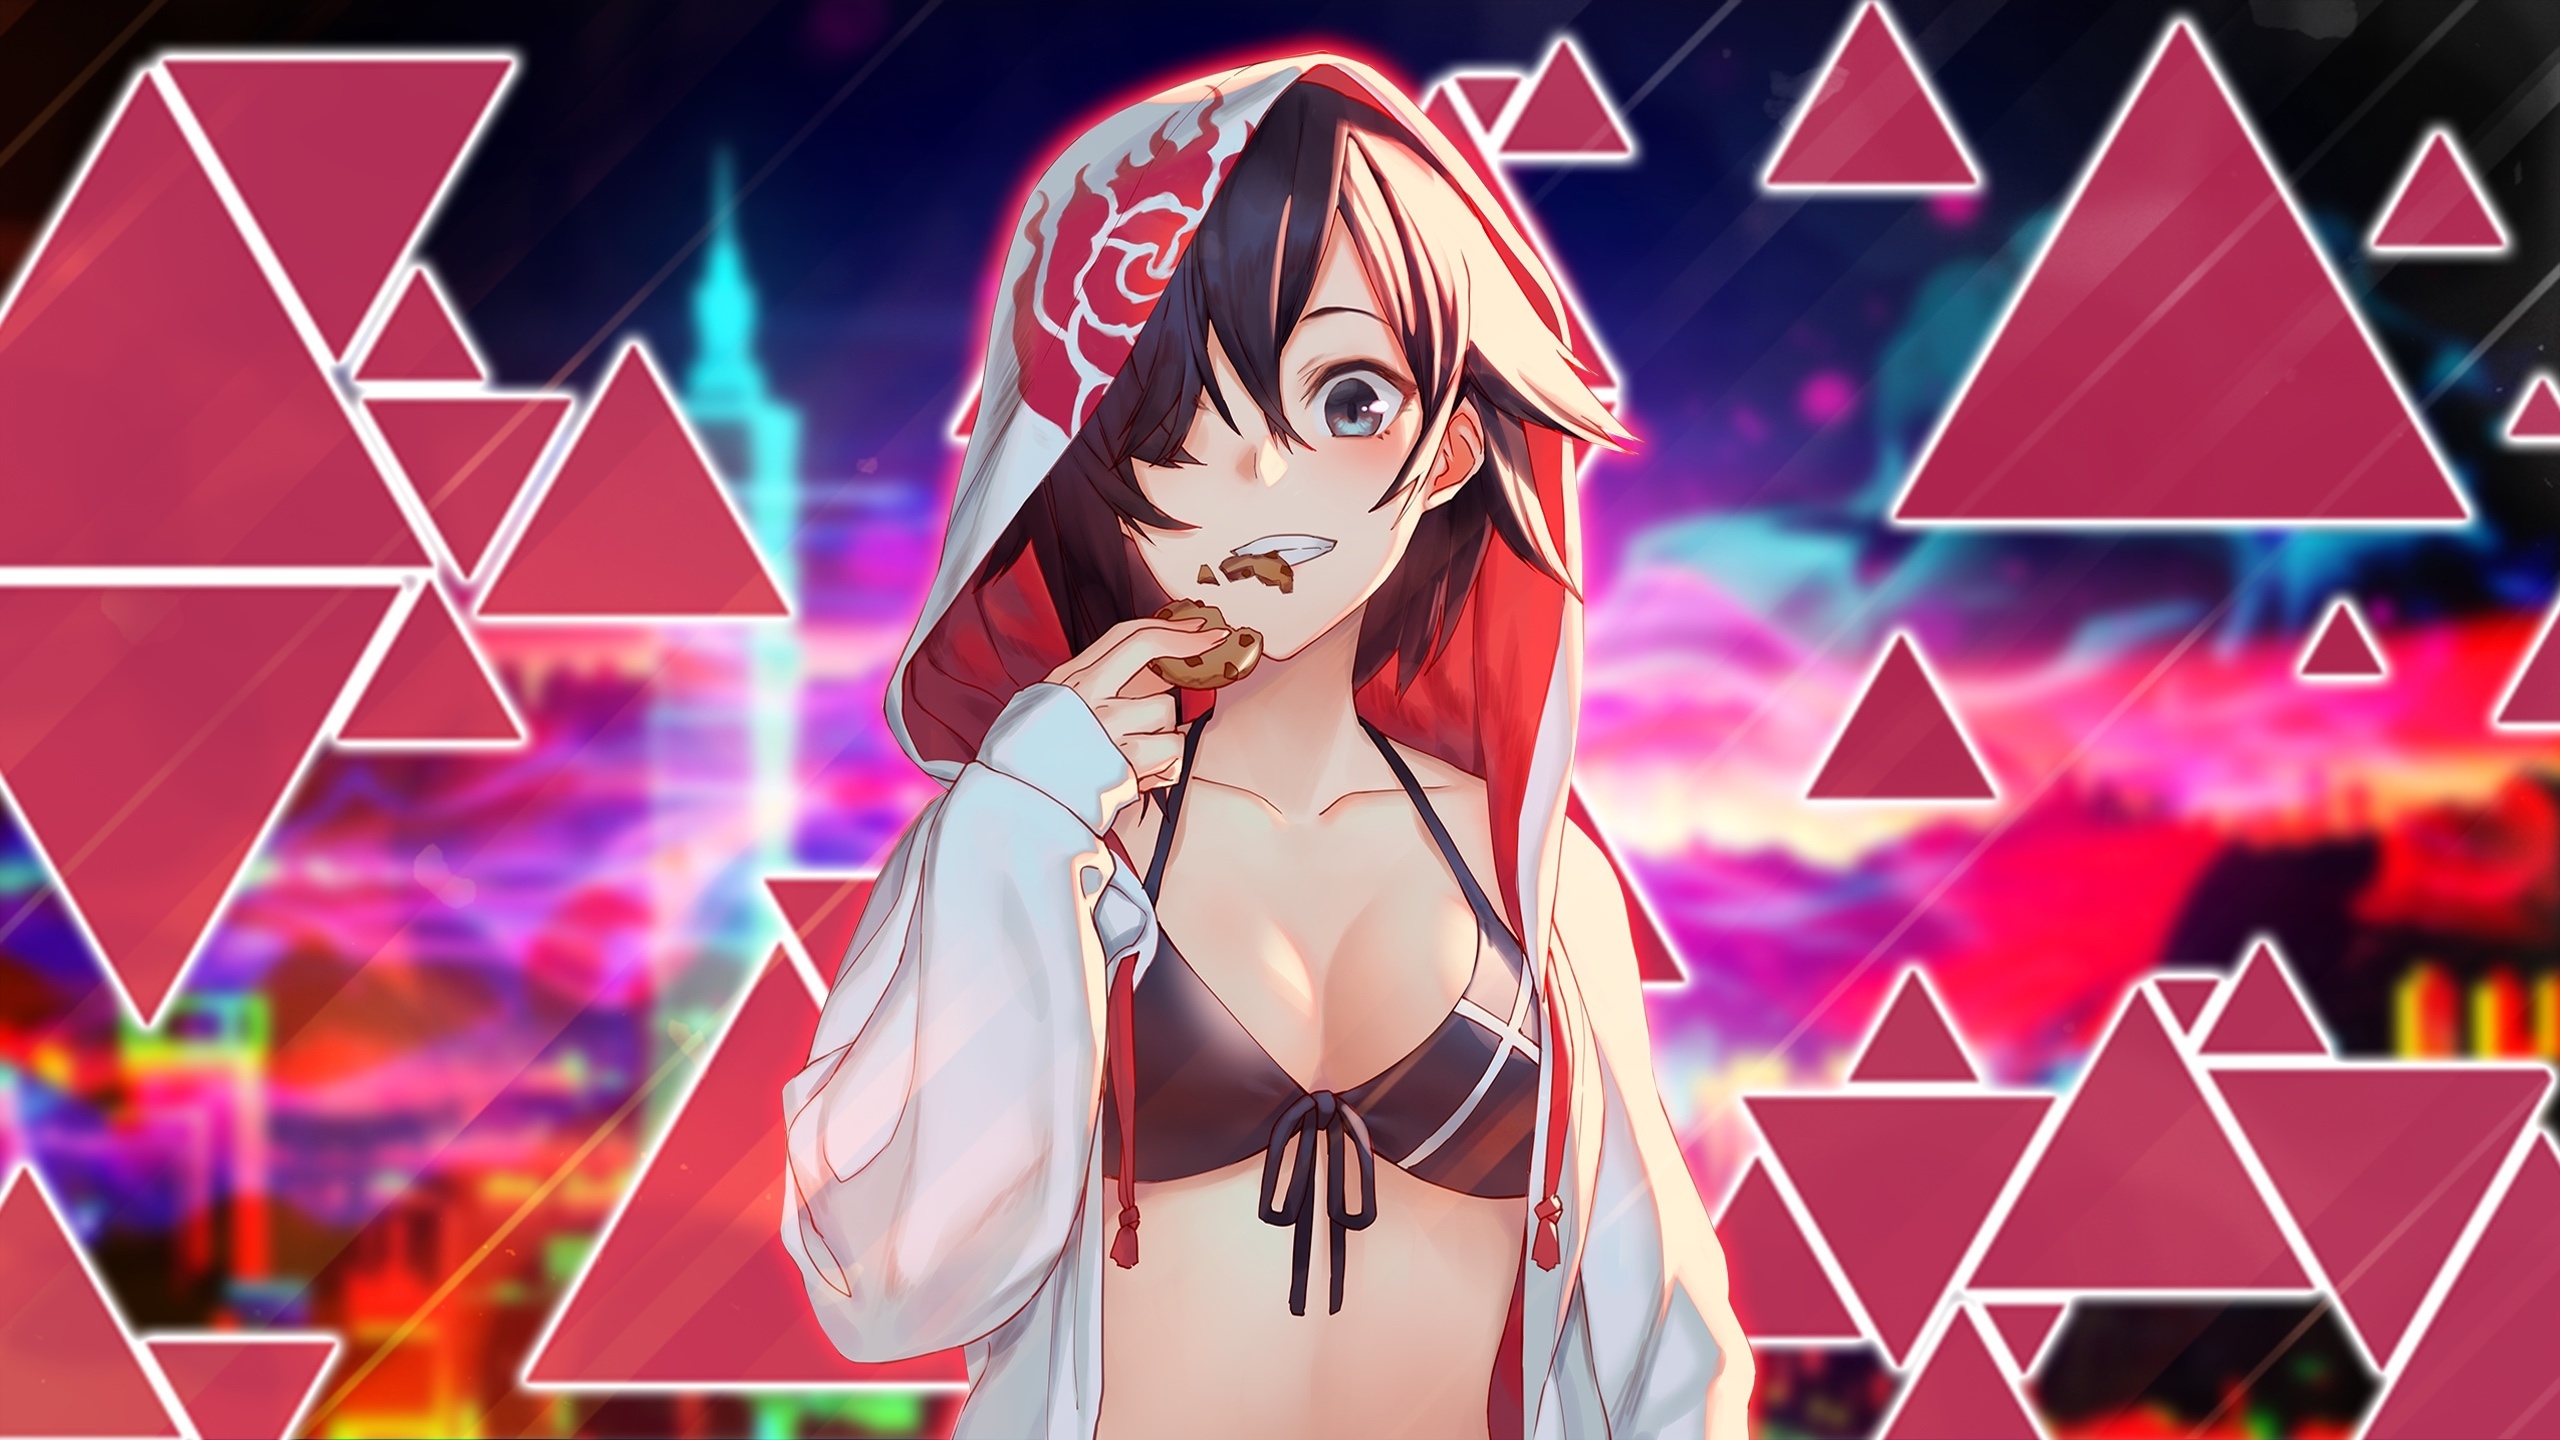 Download wallpaper x hot anime girl and cookie curious dual wide x hd background